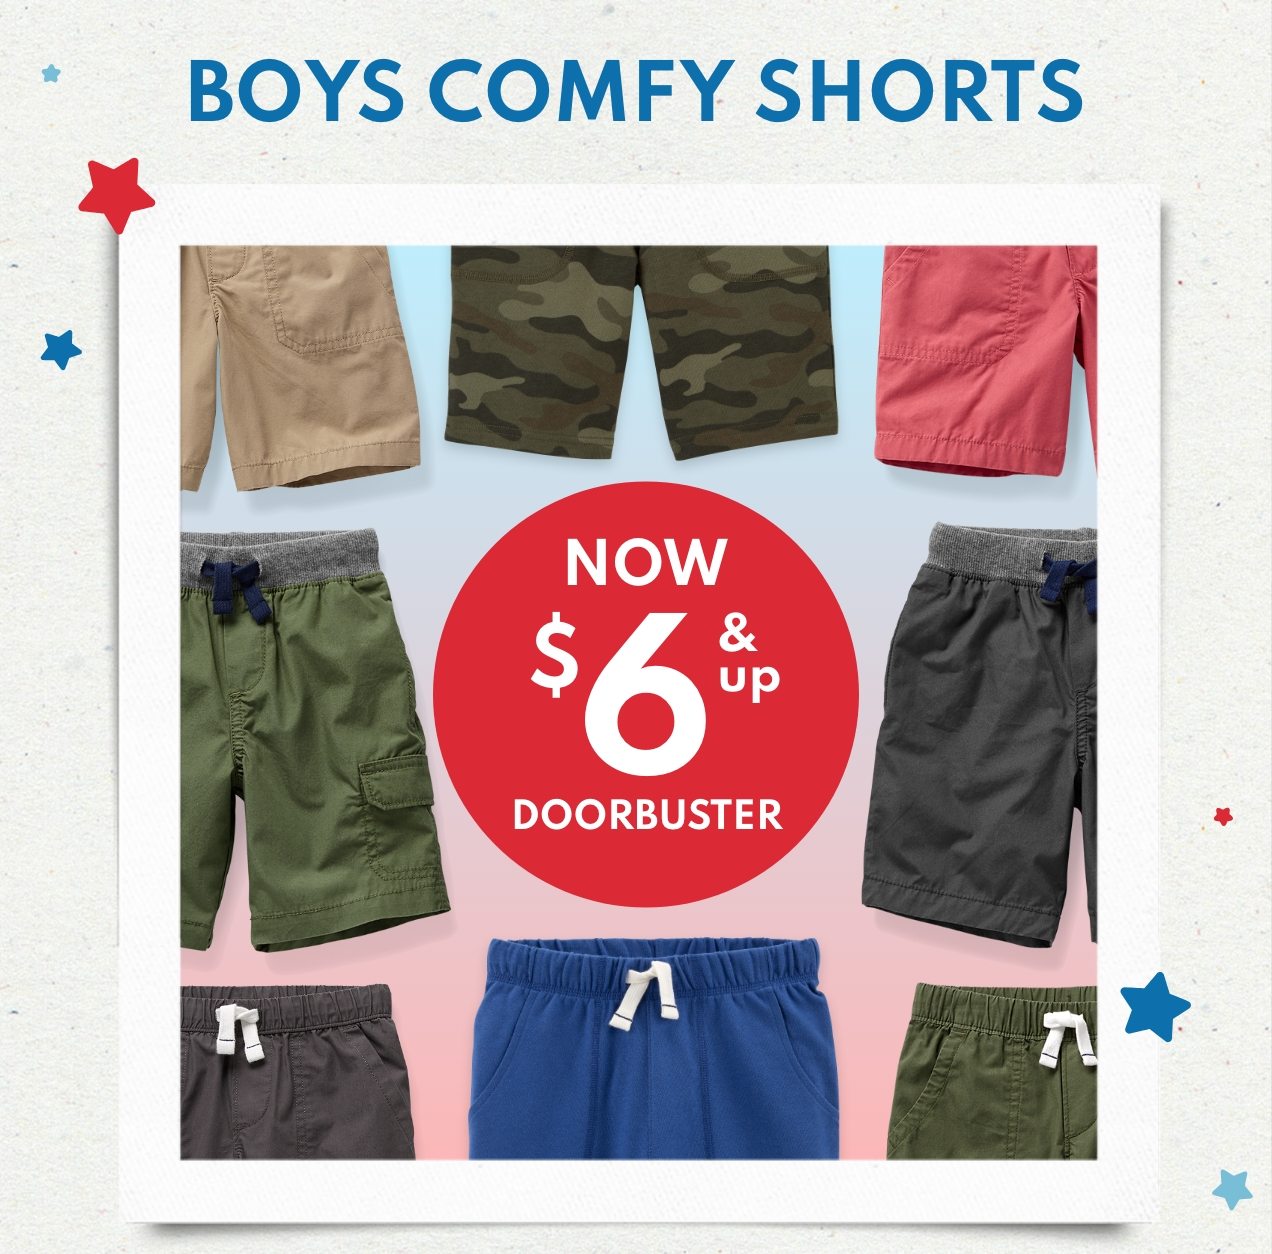 BOYS COMFY SHORTS | NOW $6 & up DOORBUSTER 